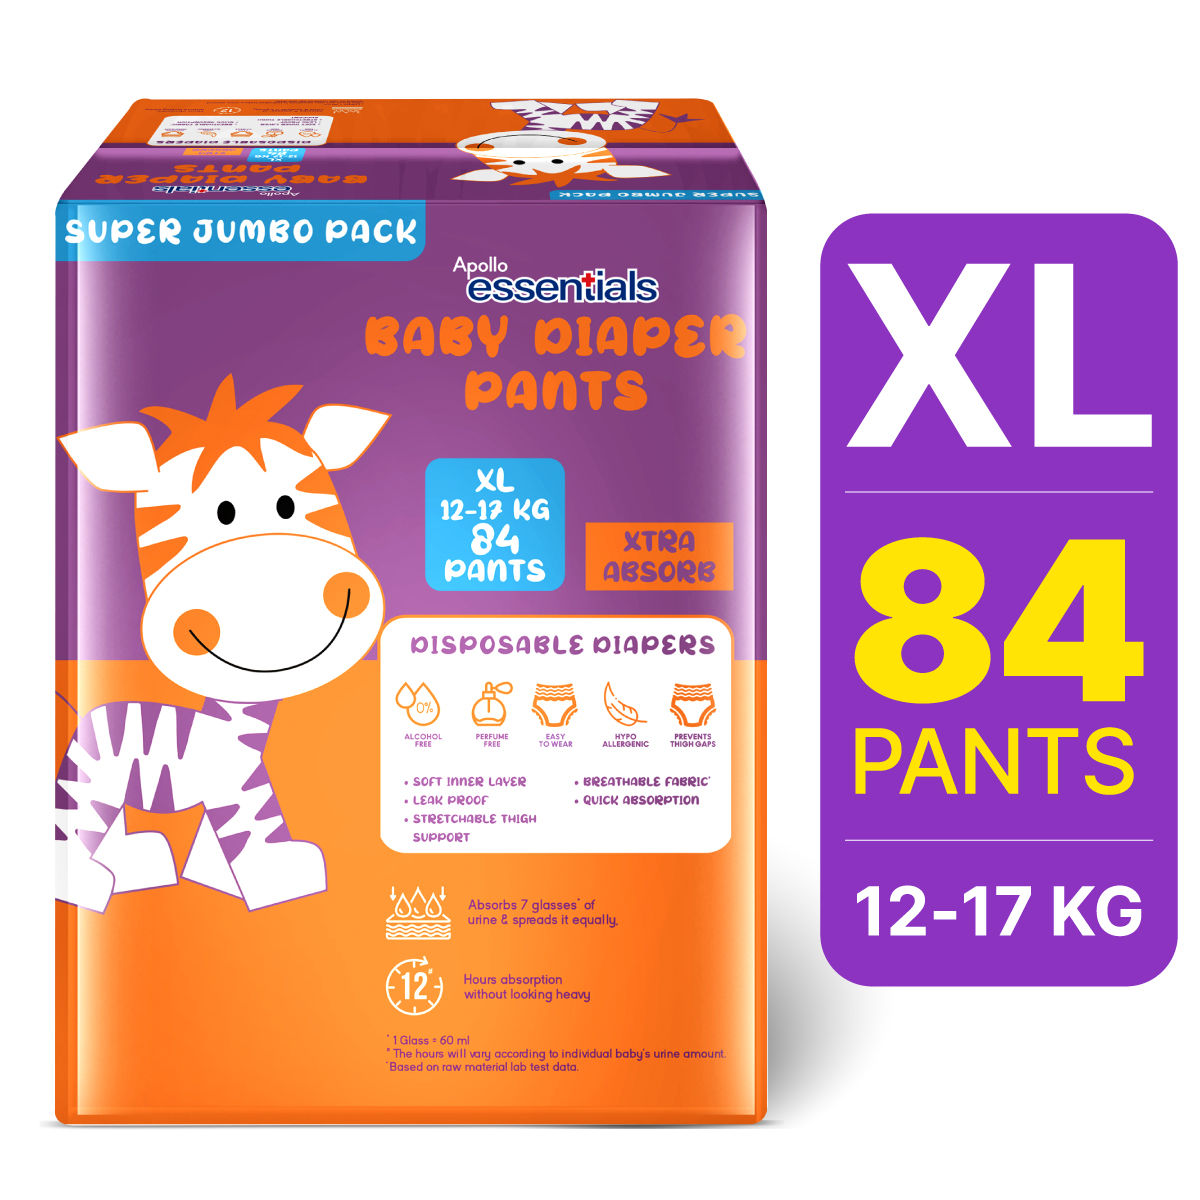 Pampers Xl Size Diaper Pants Price Starting From Rs 678 | Find Verified  Sellers at Justdial